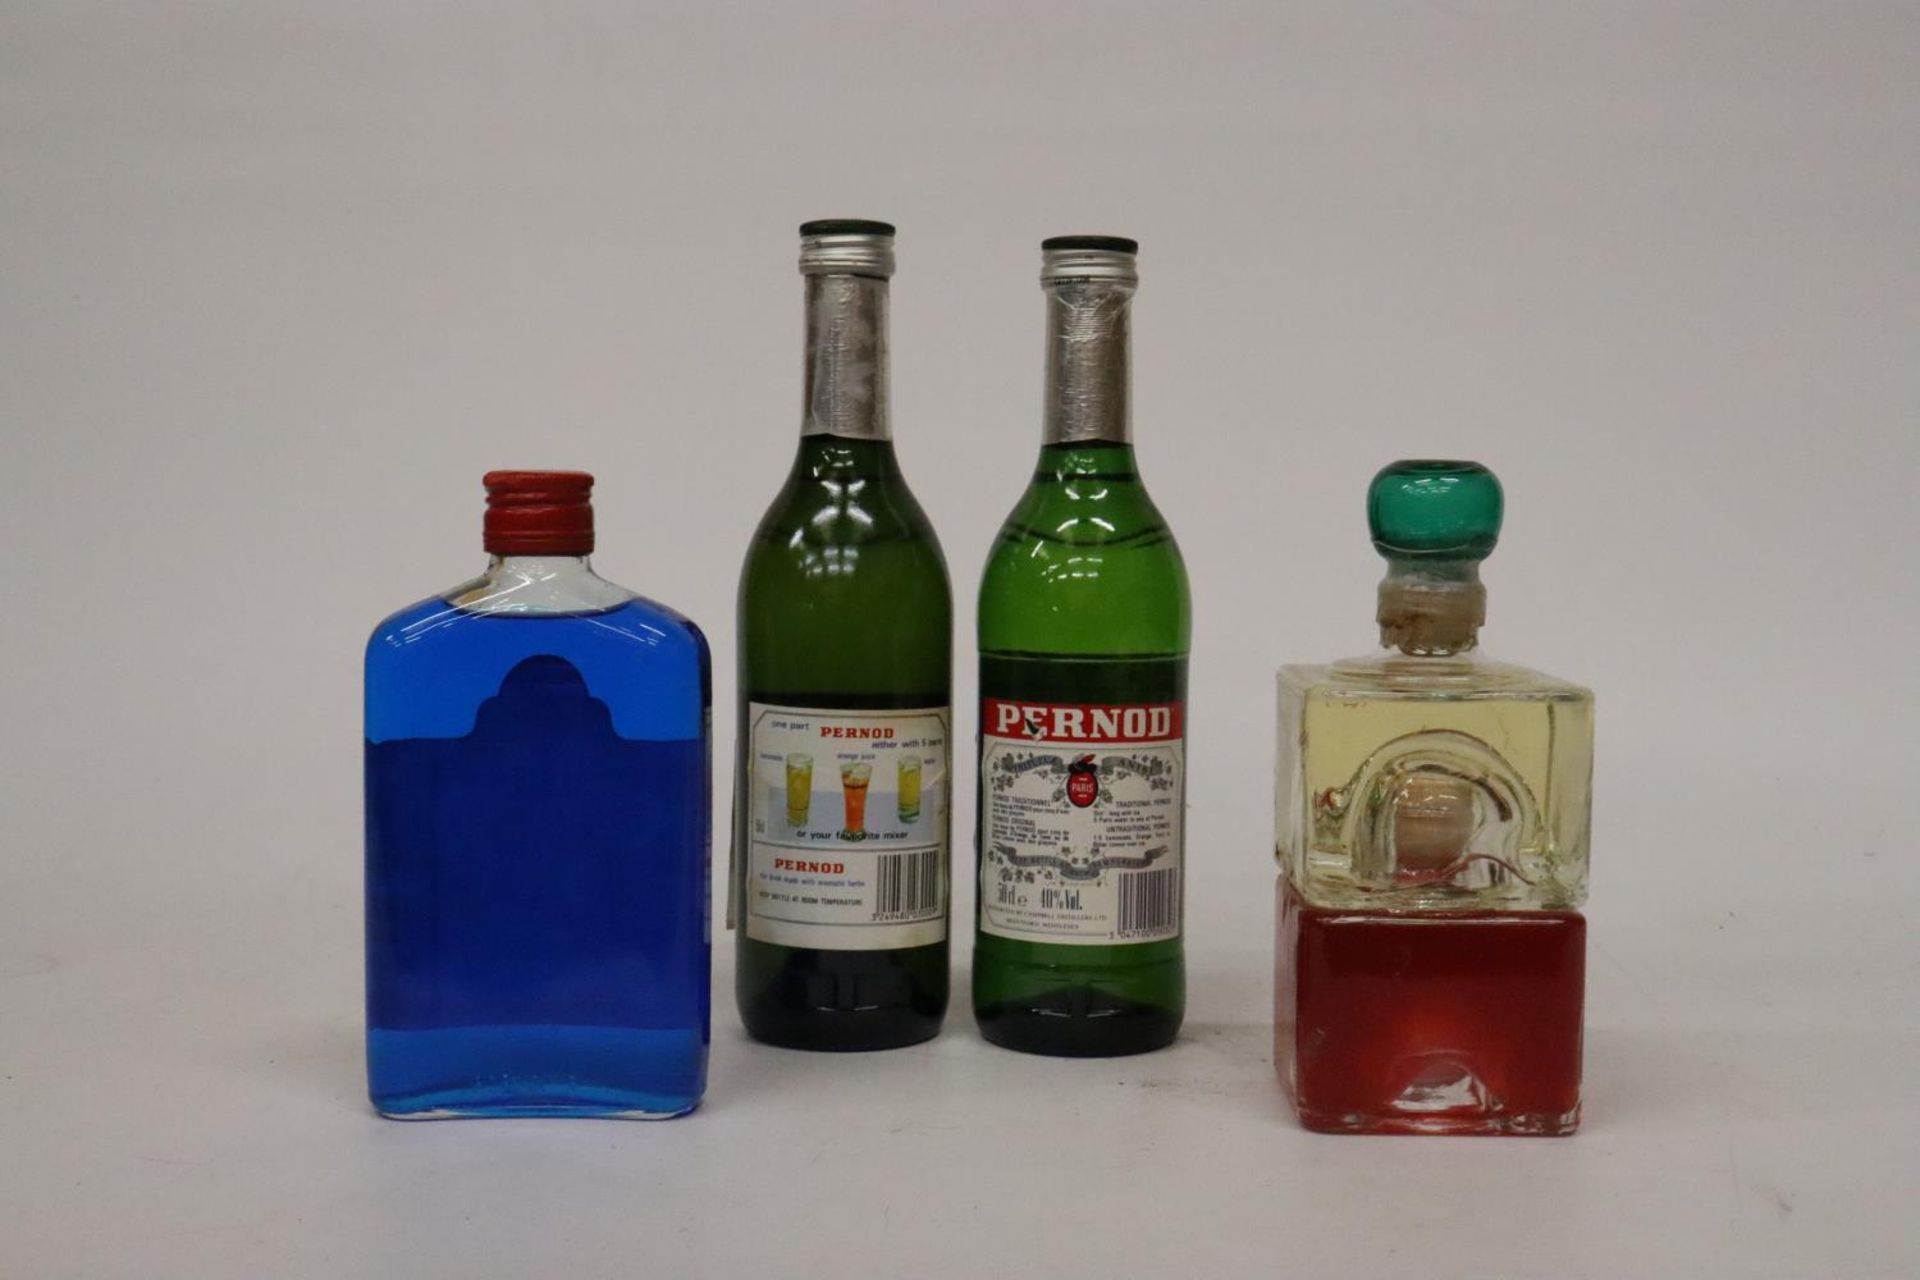 TWO 50CL BOTTLES OF PERNOD FILS, A 37.5CL BOTTLE OF BLUE CURACAO AND A BOTTLE OF - Image 3 of 4